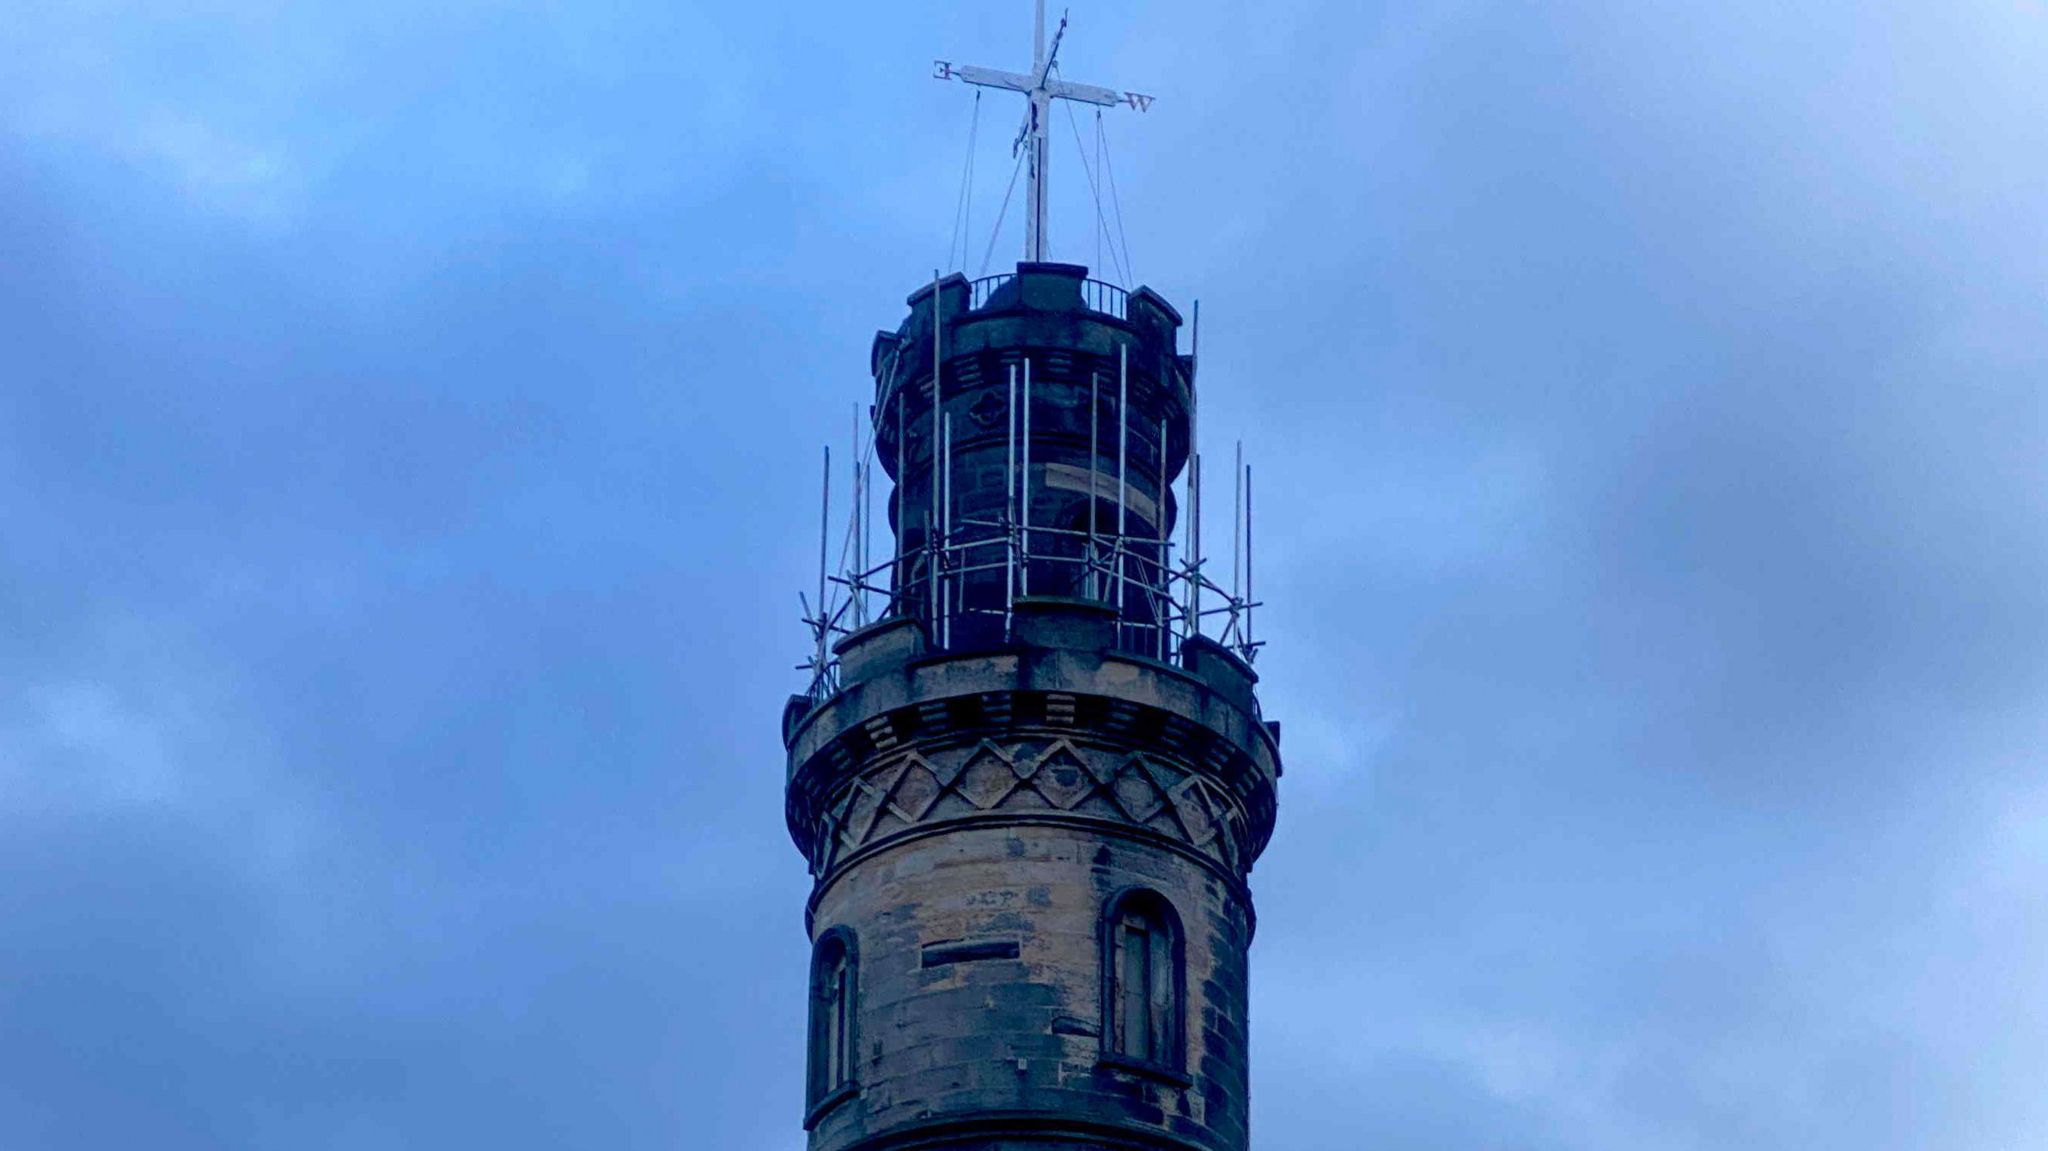 The top of Nelson's monument